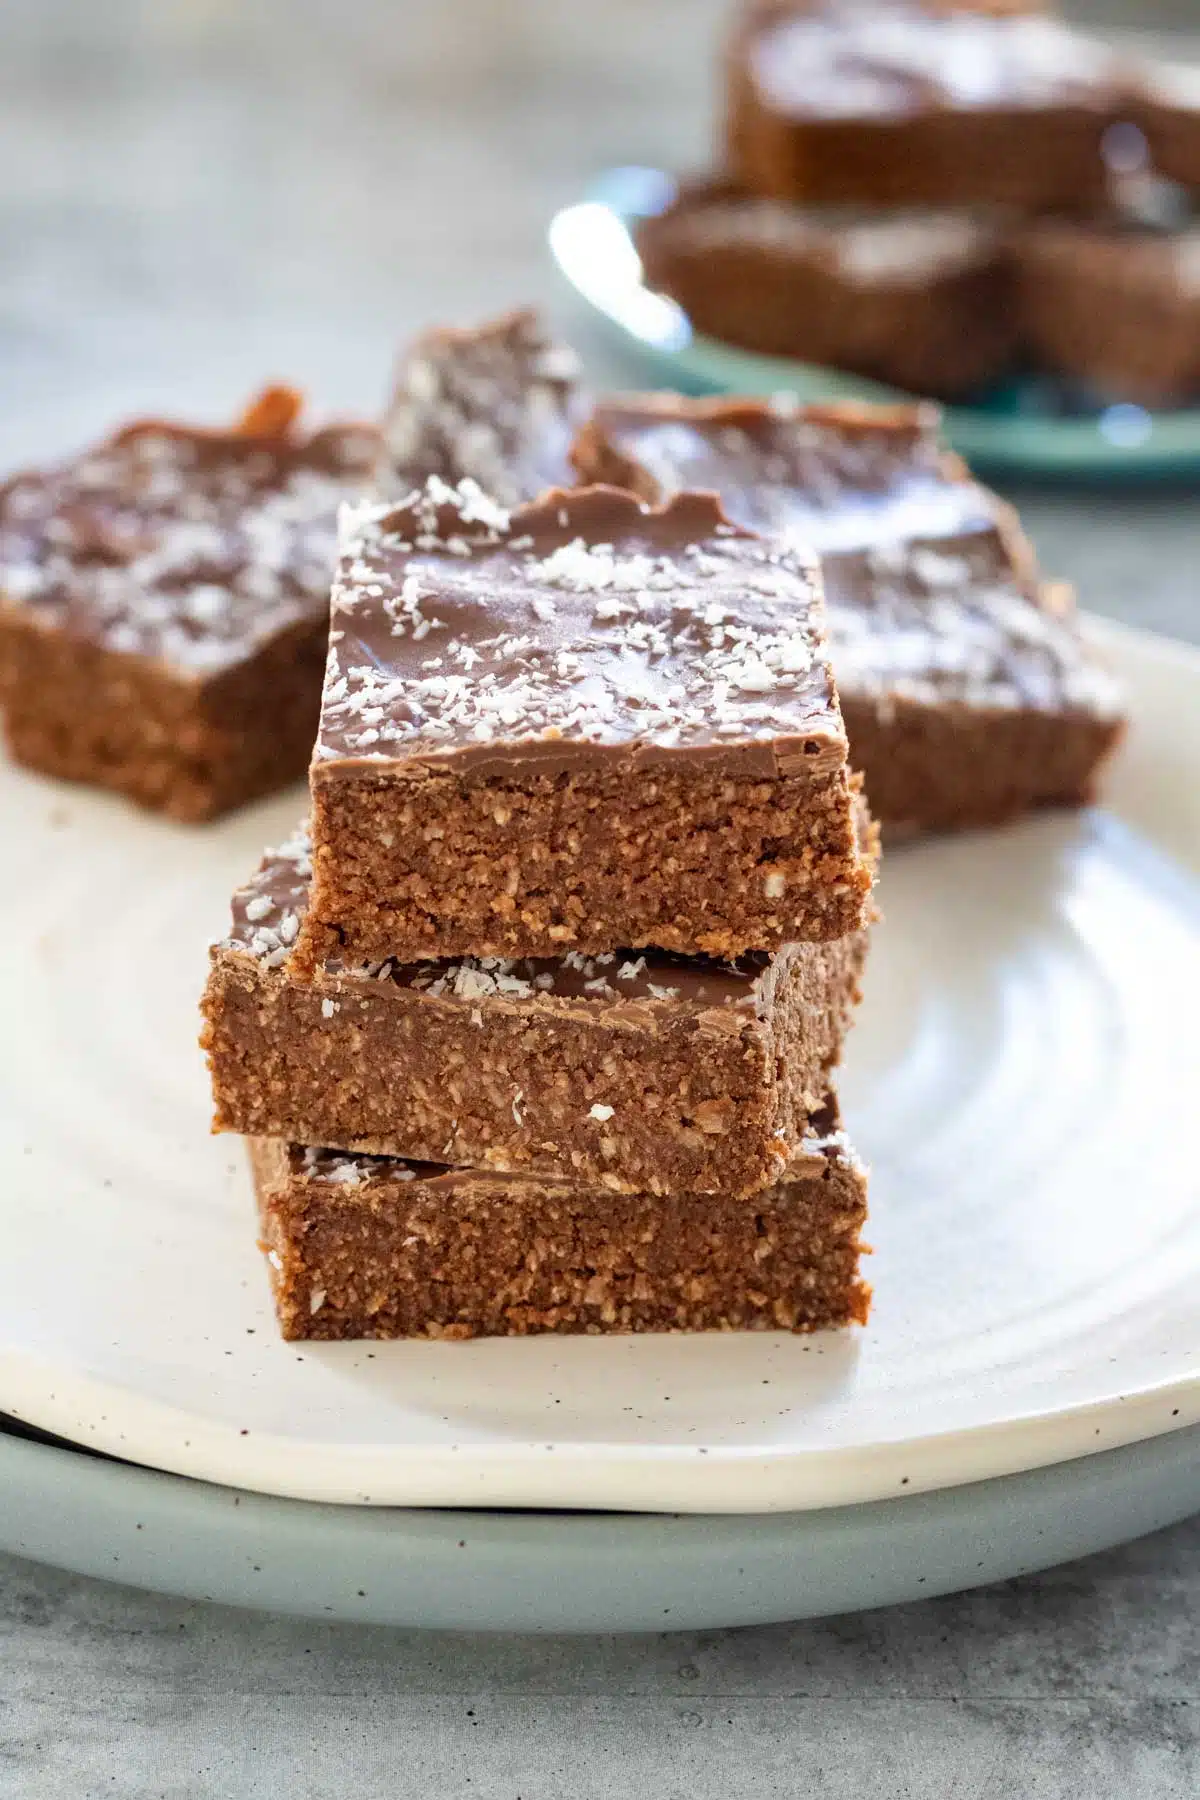 A stack of 3 coconut chocolate slice pieces are sitting on a white plate with a few behind them on the same plate. A small teal plate is also behind and to the right filled with more slice pieces.